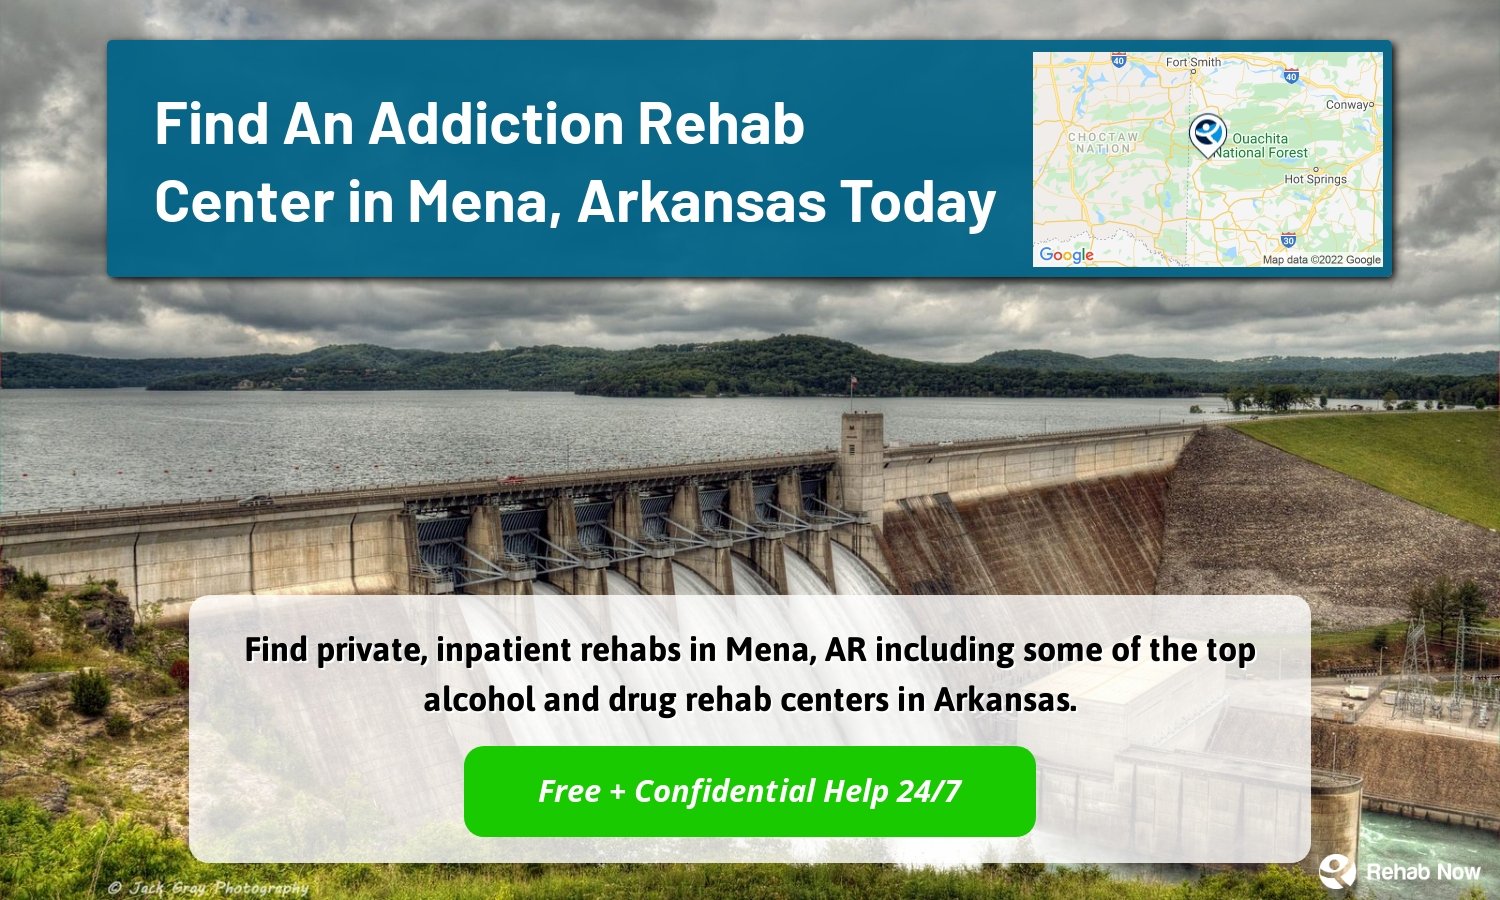 Find private, inpatient rehabs in Mena, AR including some of the top alcohol and drug rehab centers in Arkansas.